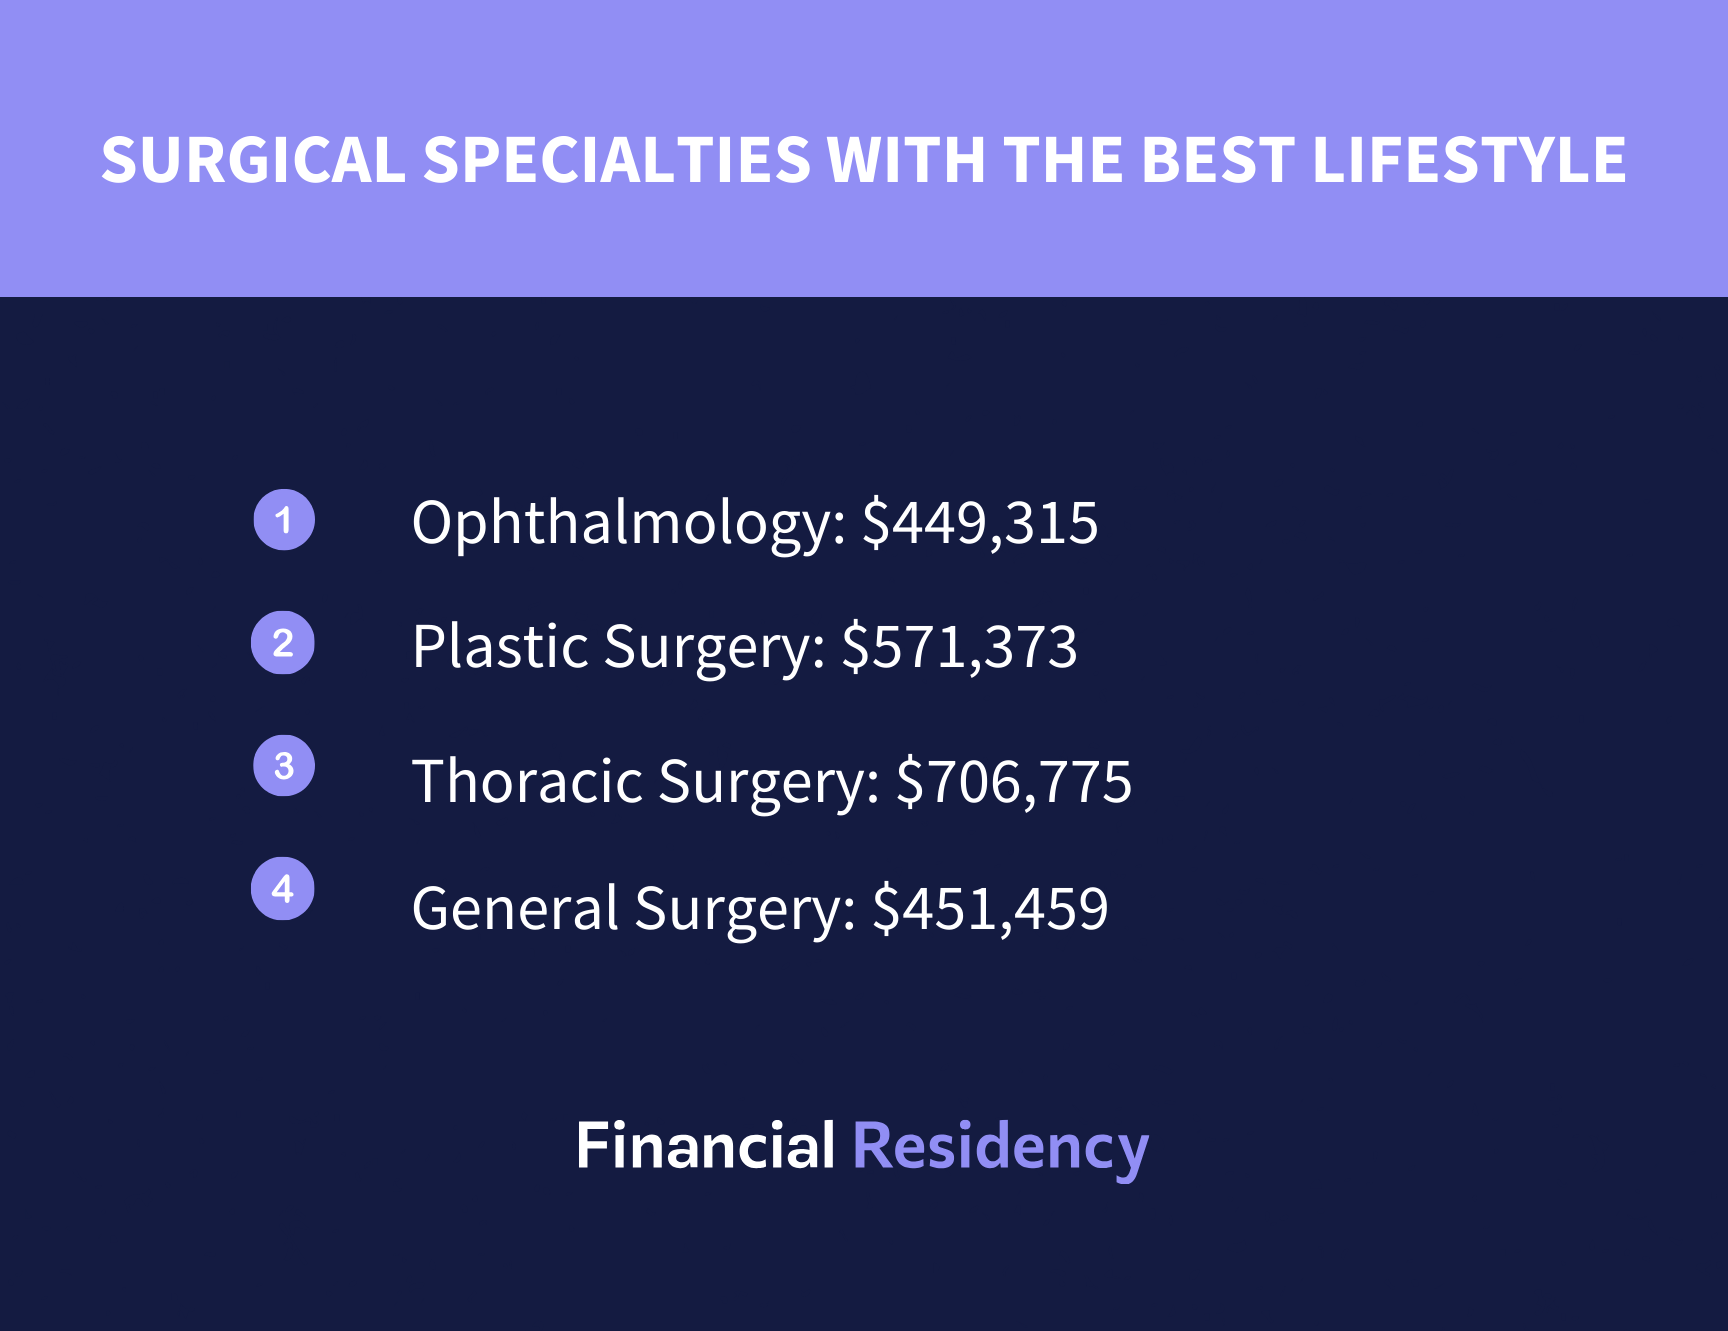 Surgical Specialties with the Best Lifestyle